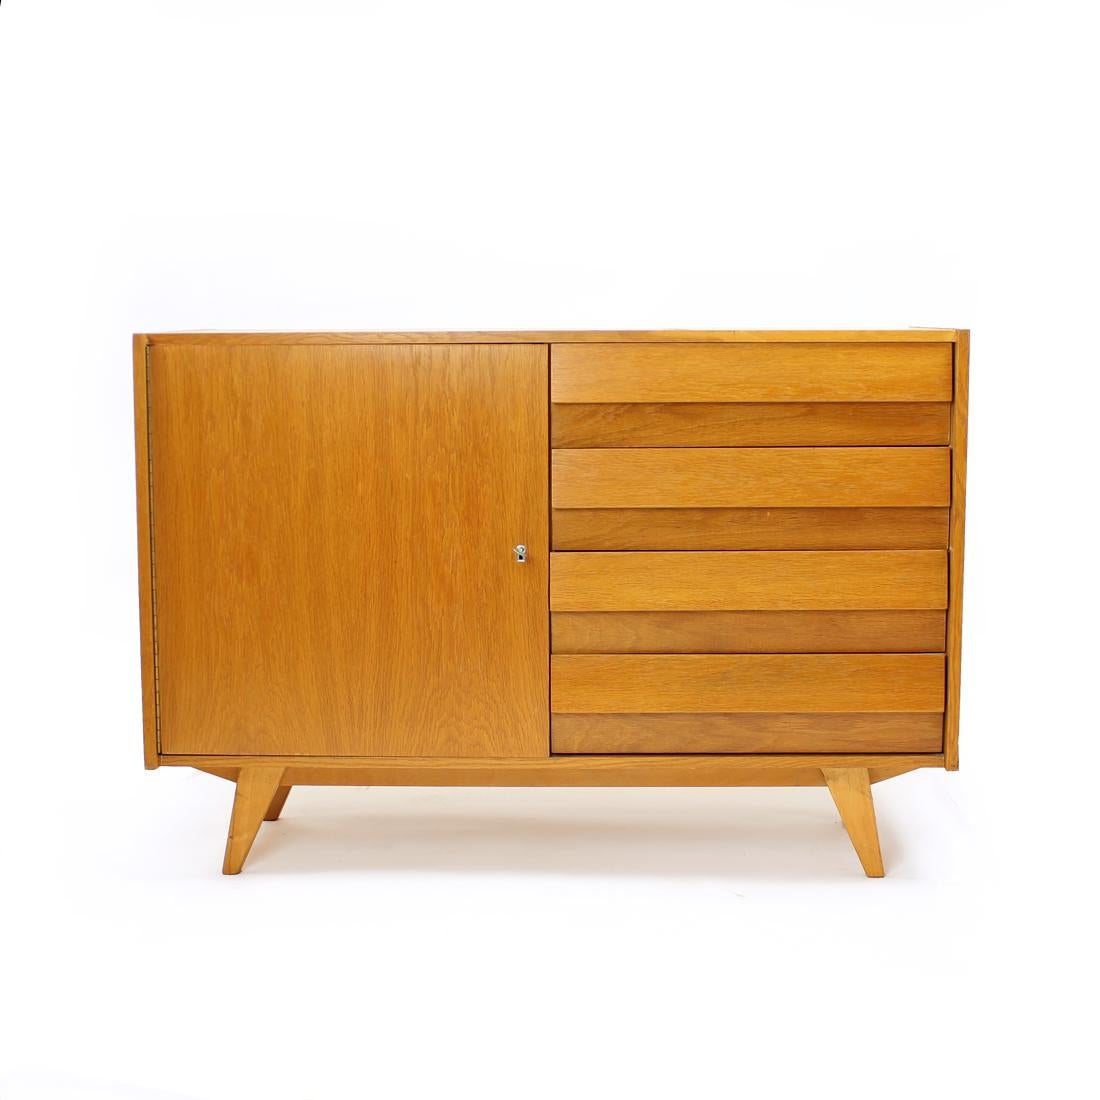 Iconic sideboard designed by Jiri Jiroutek for Interier Praha in 1960s, original label still sttached. The sideboard in in half drawer, half compartment version. On the right side there are four drawers, plastic inside, oak wood fronts. The left